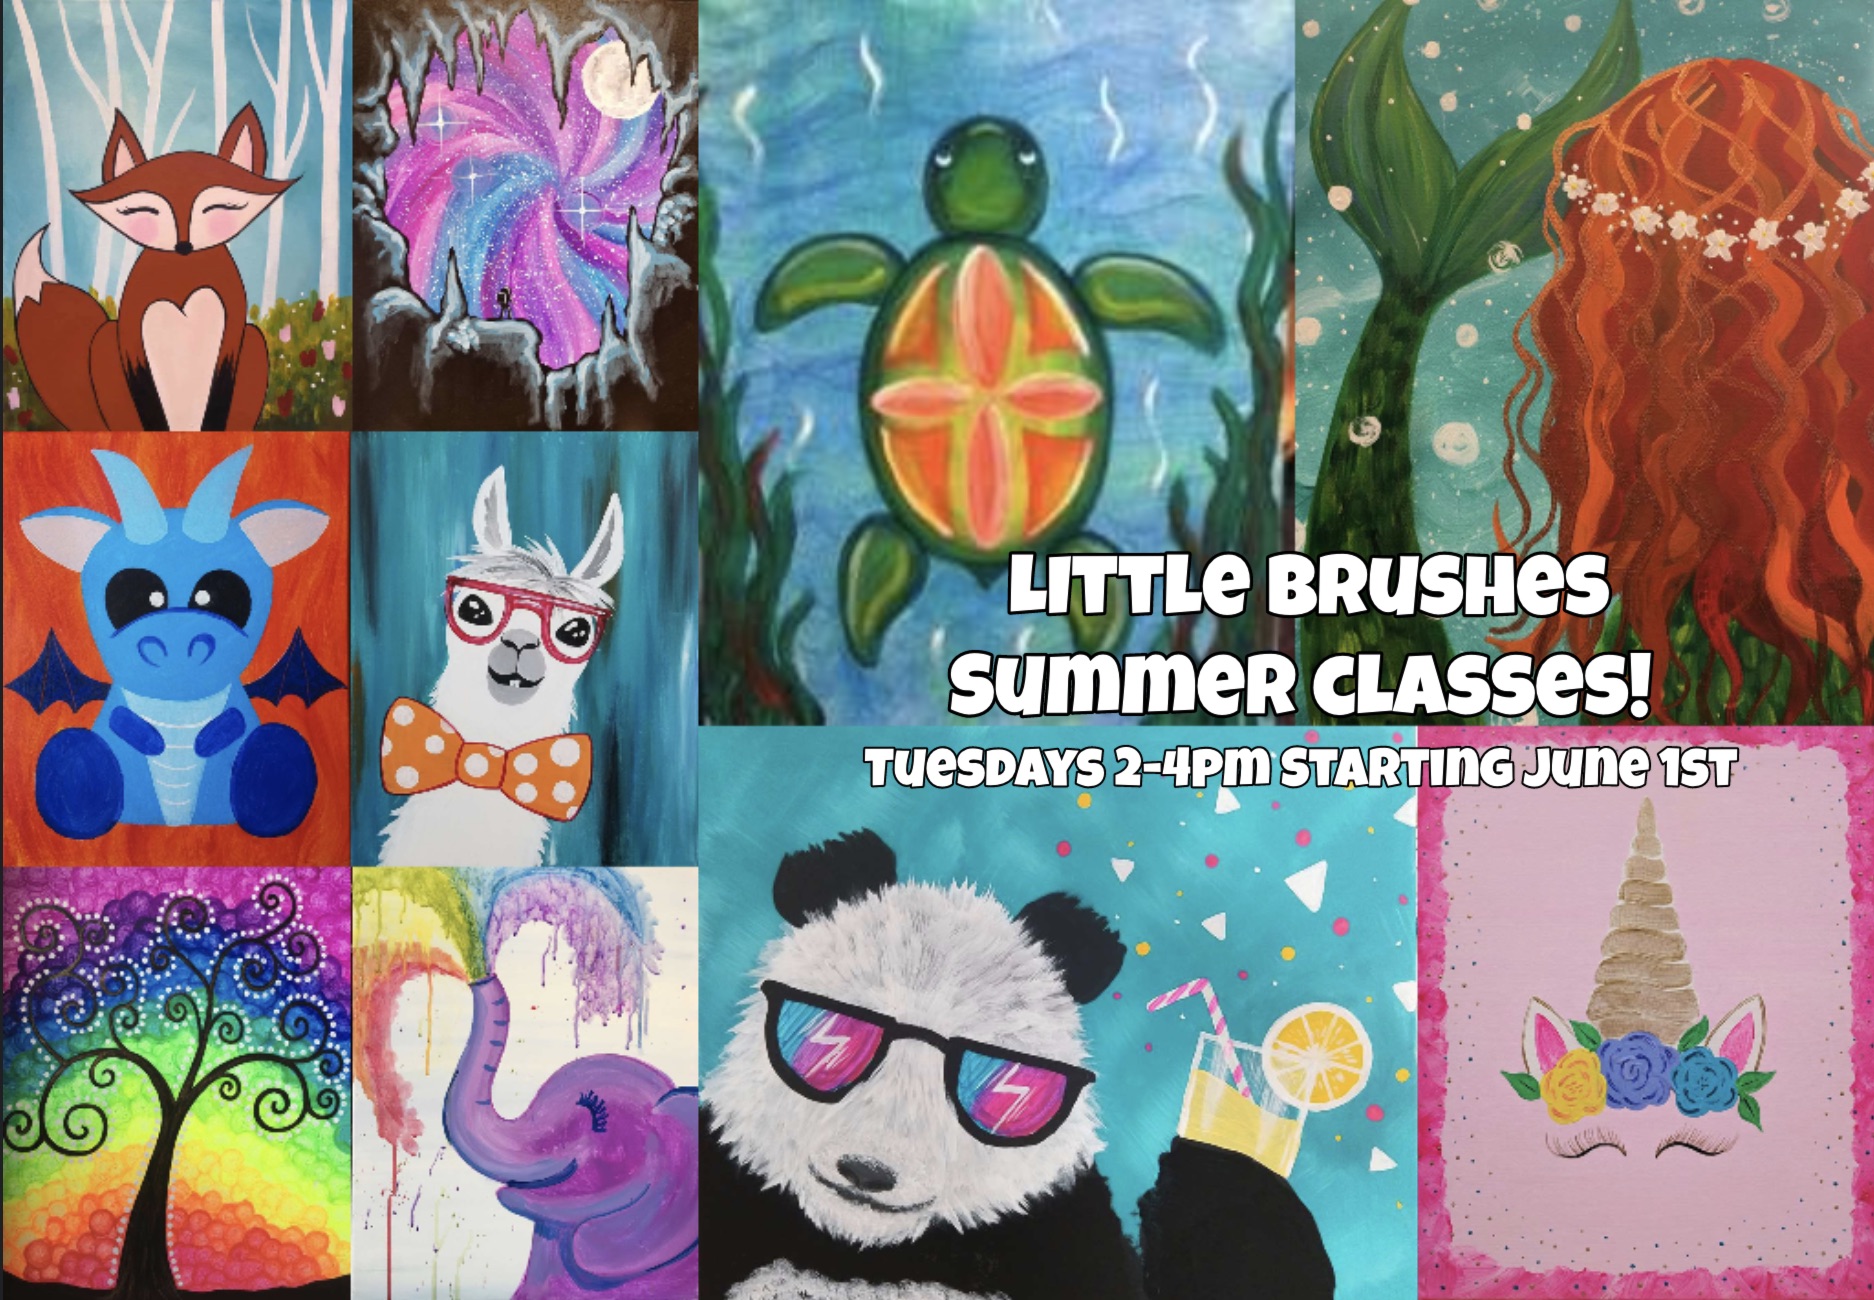 Summertime Little Brushes Classes: Every Tuesday!